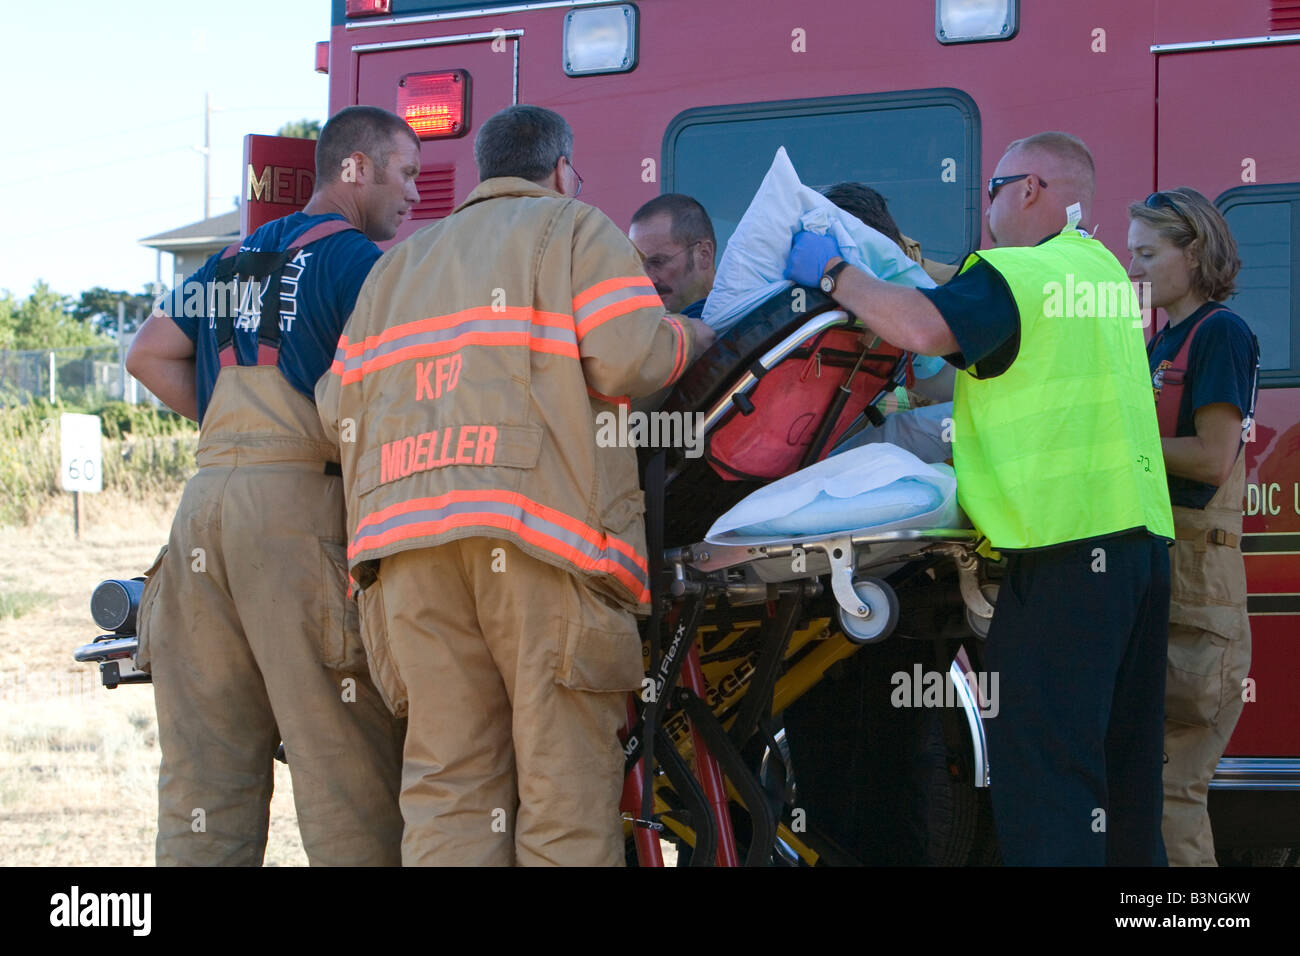 Paramedics providing emergency medical treatment to a person involved in a car accident at Kennewick Washington Stock Photo